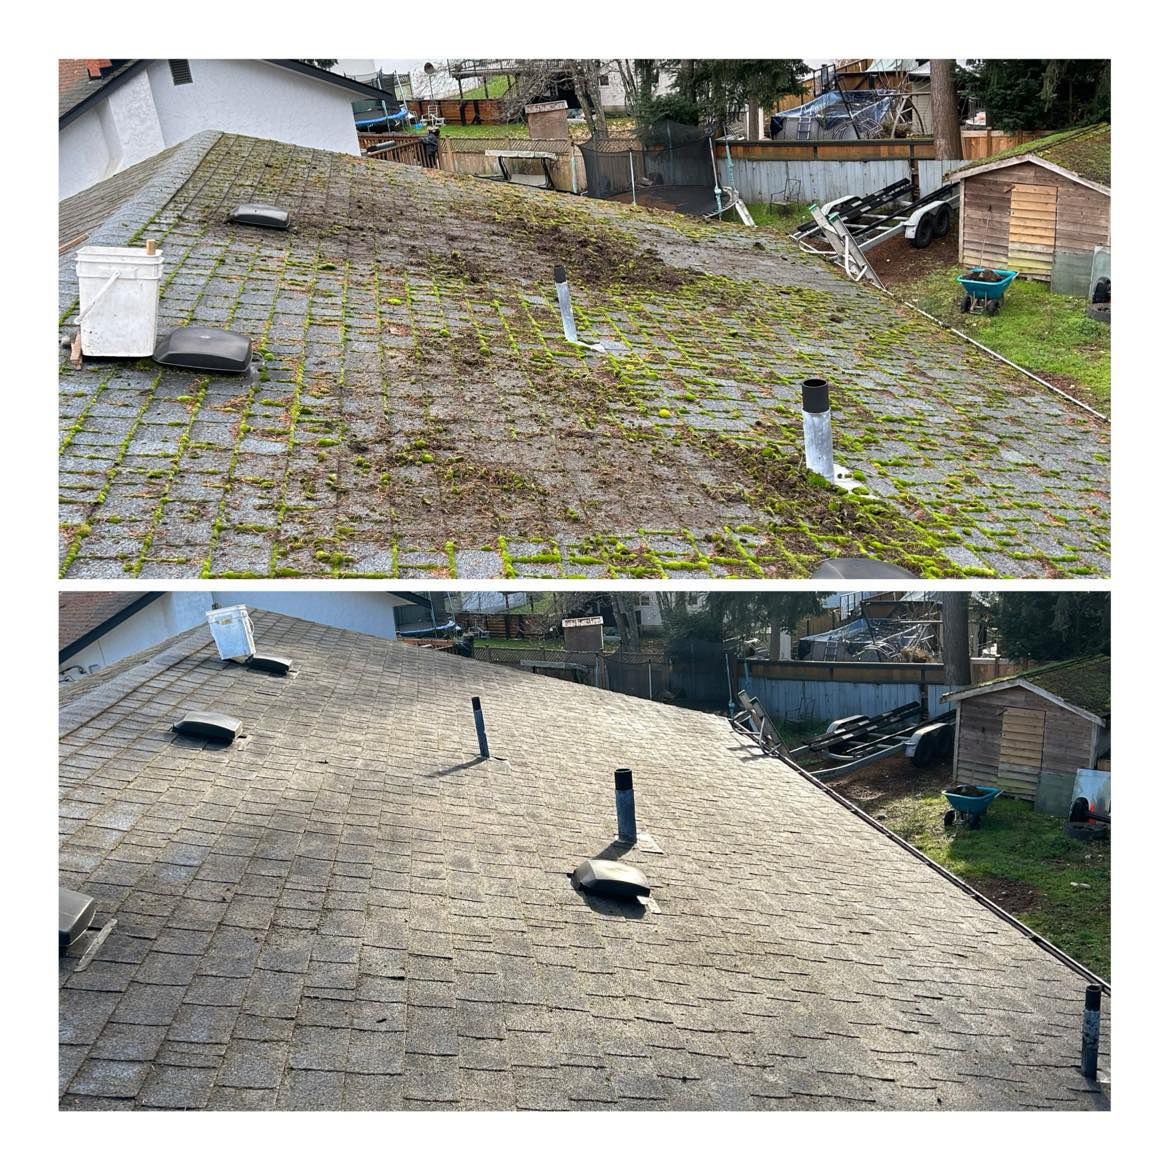 A nice before and after photo of a recently cleaned roof that had a ton of moss and debris growing on it